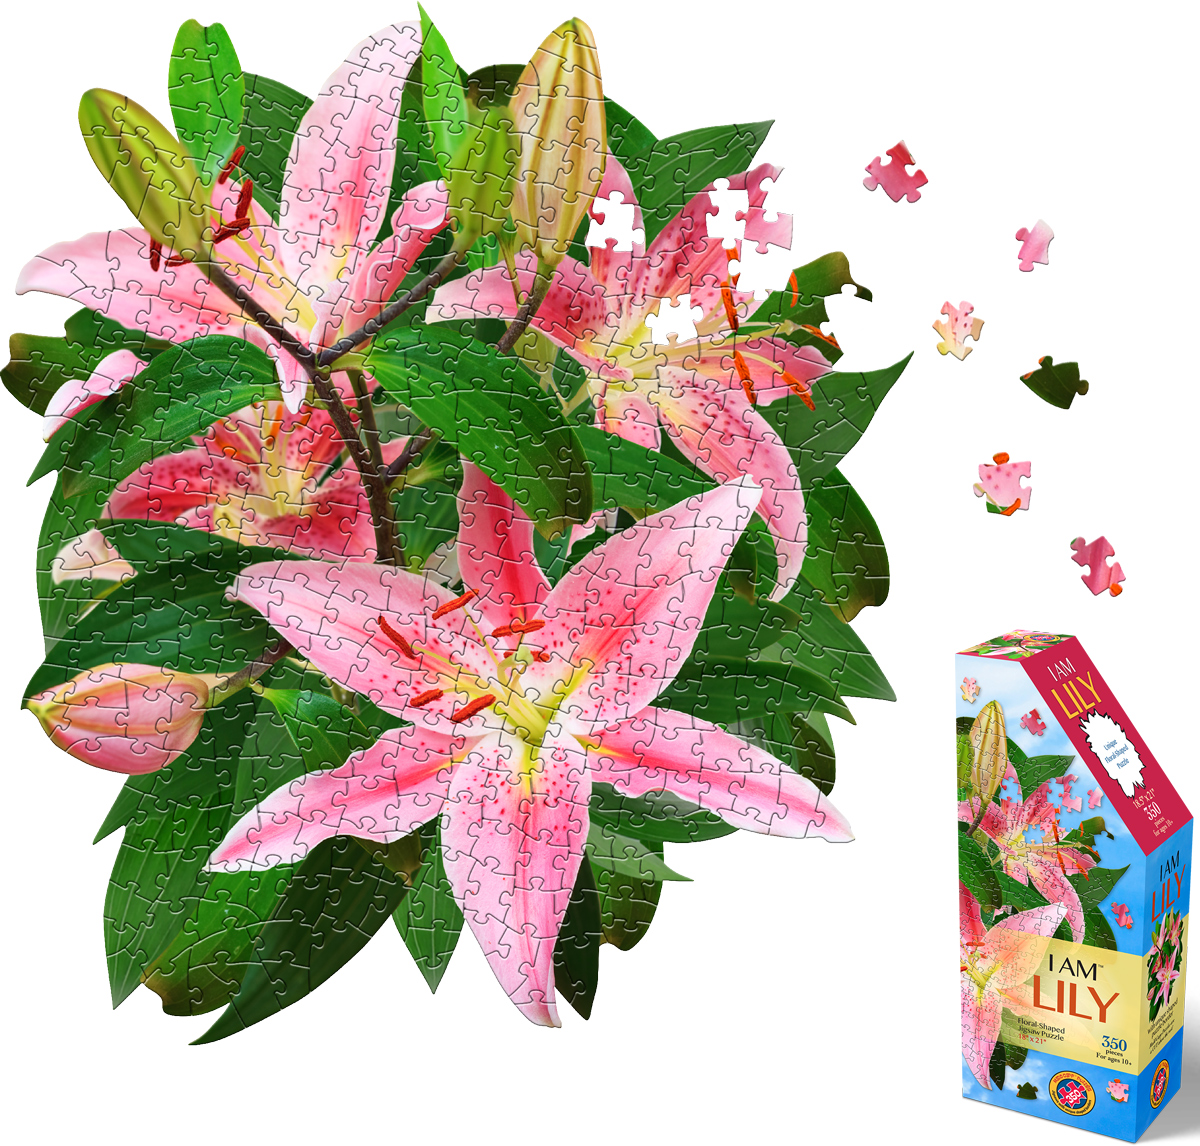 I Am Lily Flower & Garden Shaped Puzzle